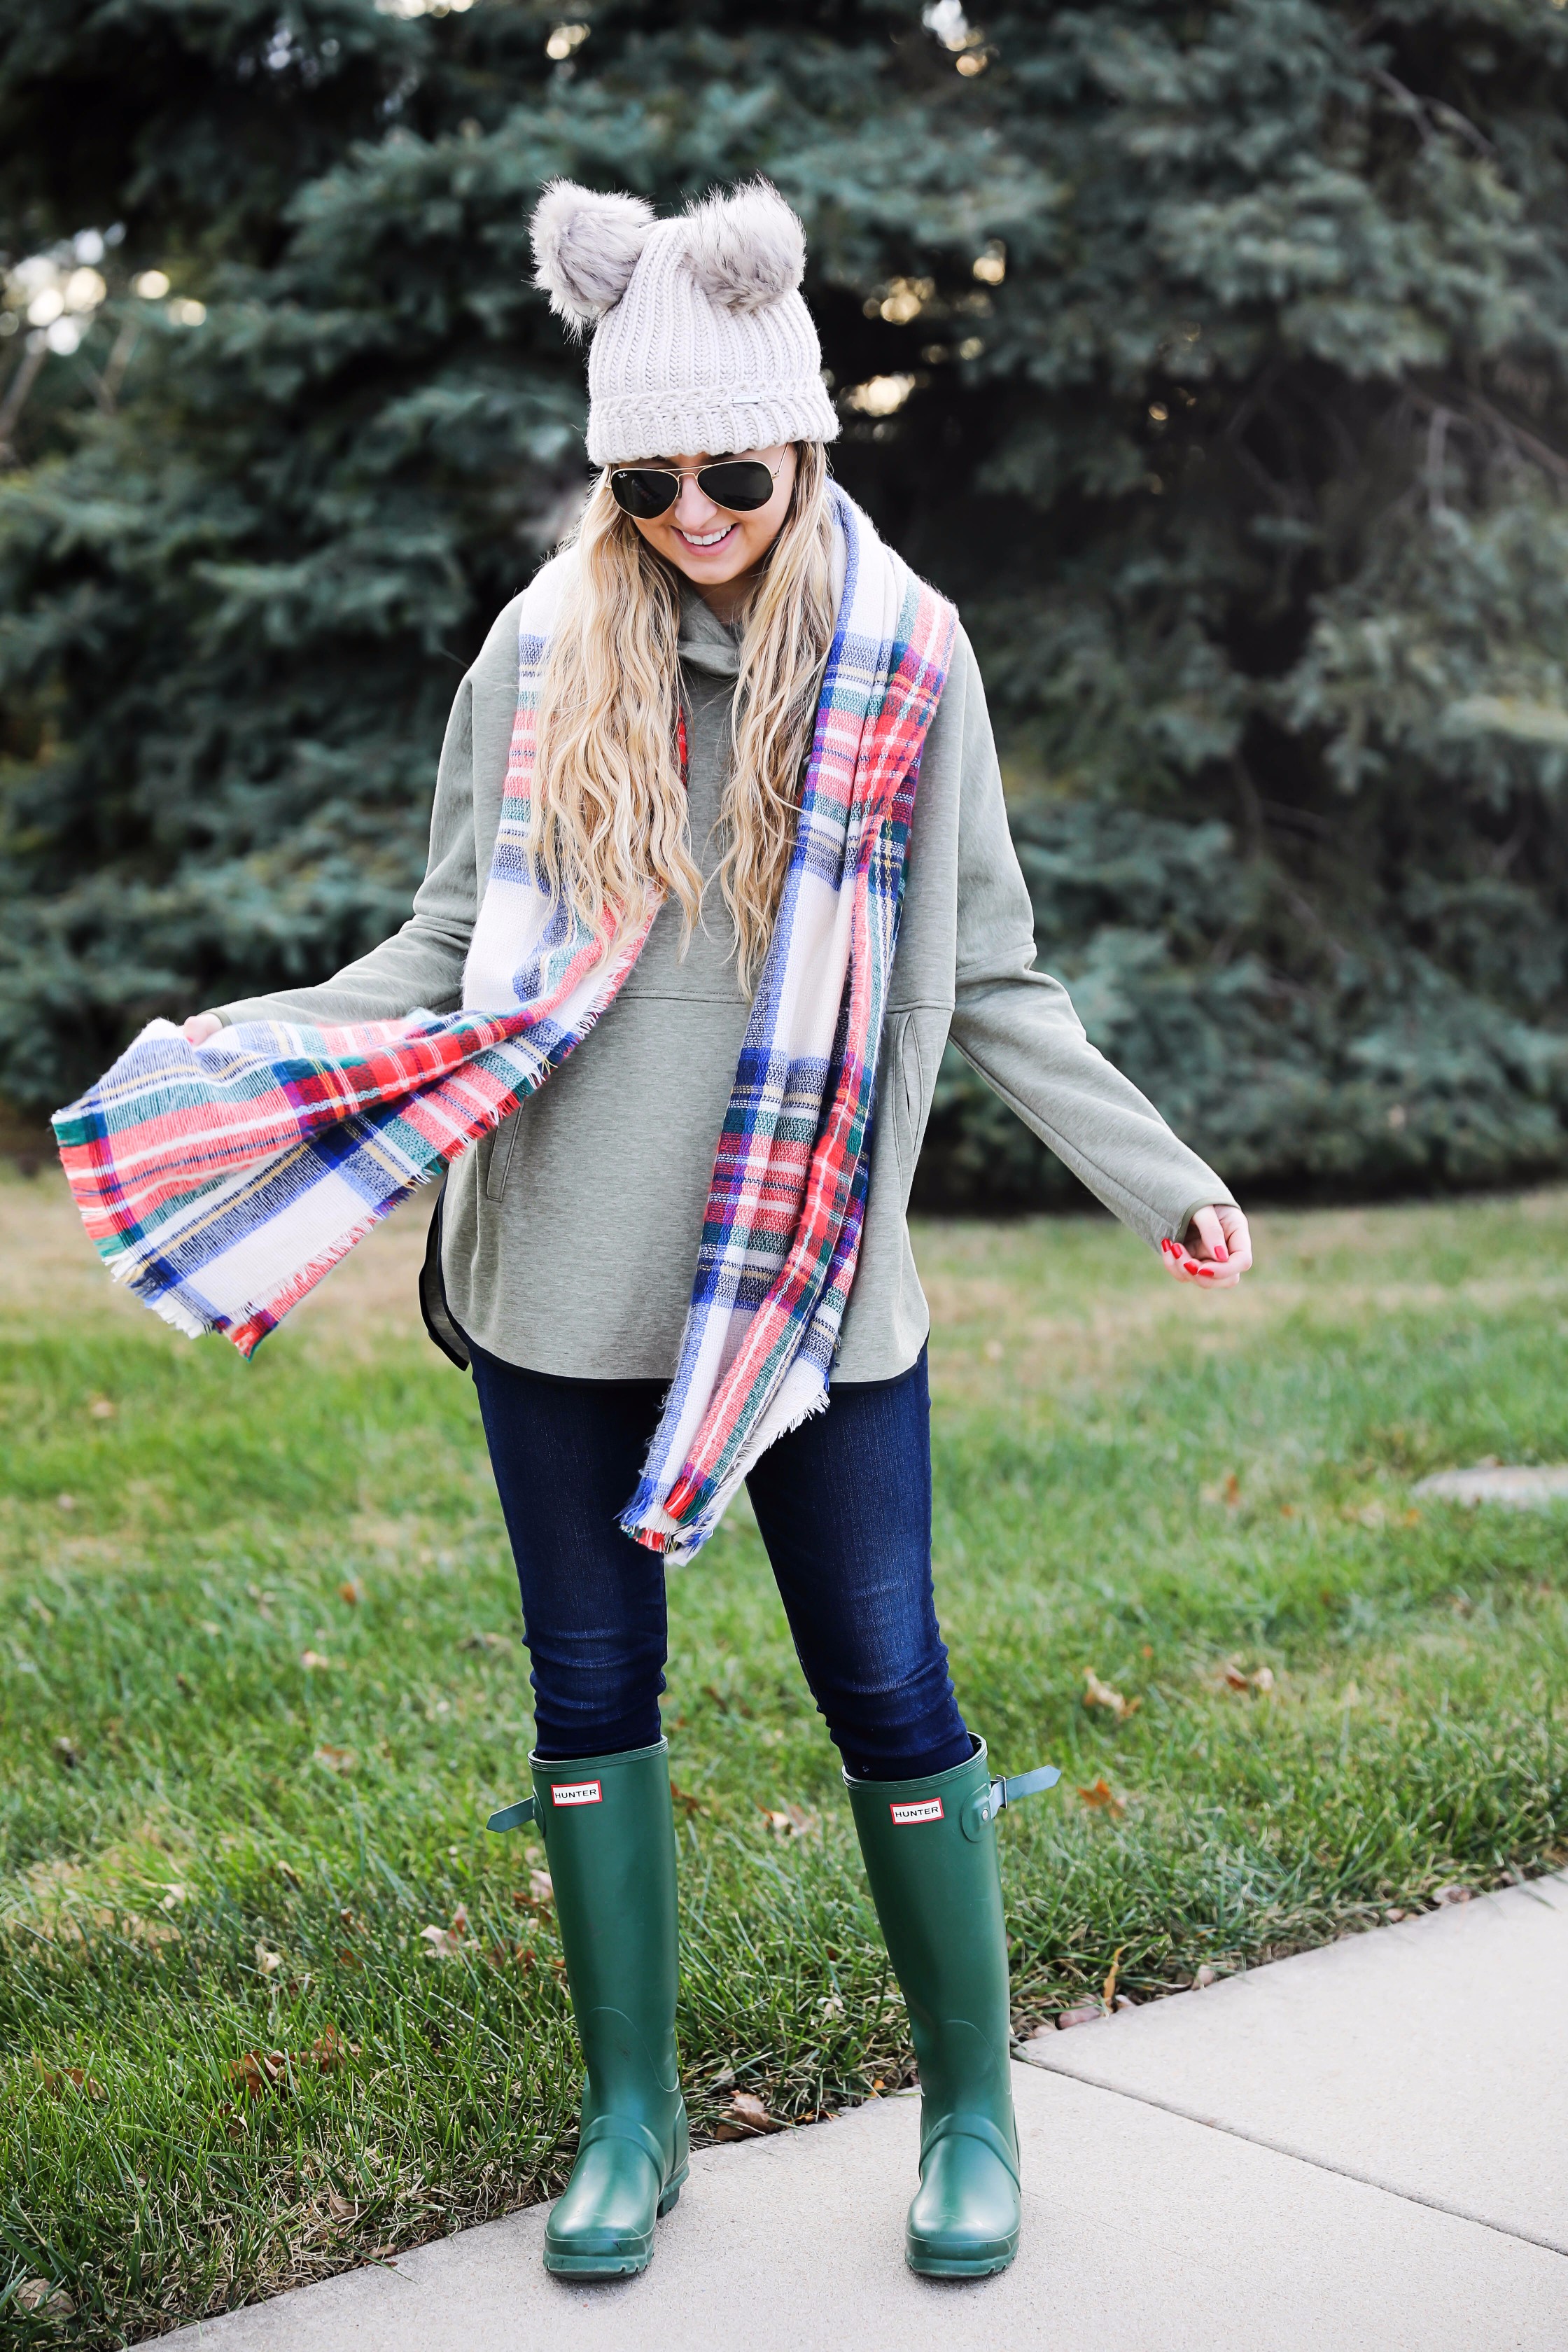 Christmas colored plaid scarf paired with my olive north face and faux fur ear beanie! Wearing my green hunter boots to make this look a casual holiday outfit! Details on daily dose of charm by lauren lindmark